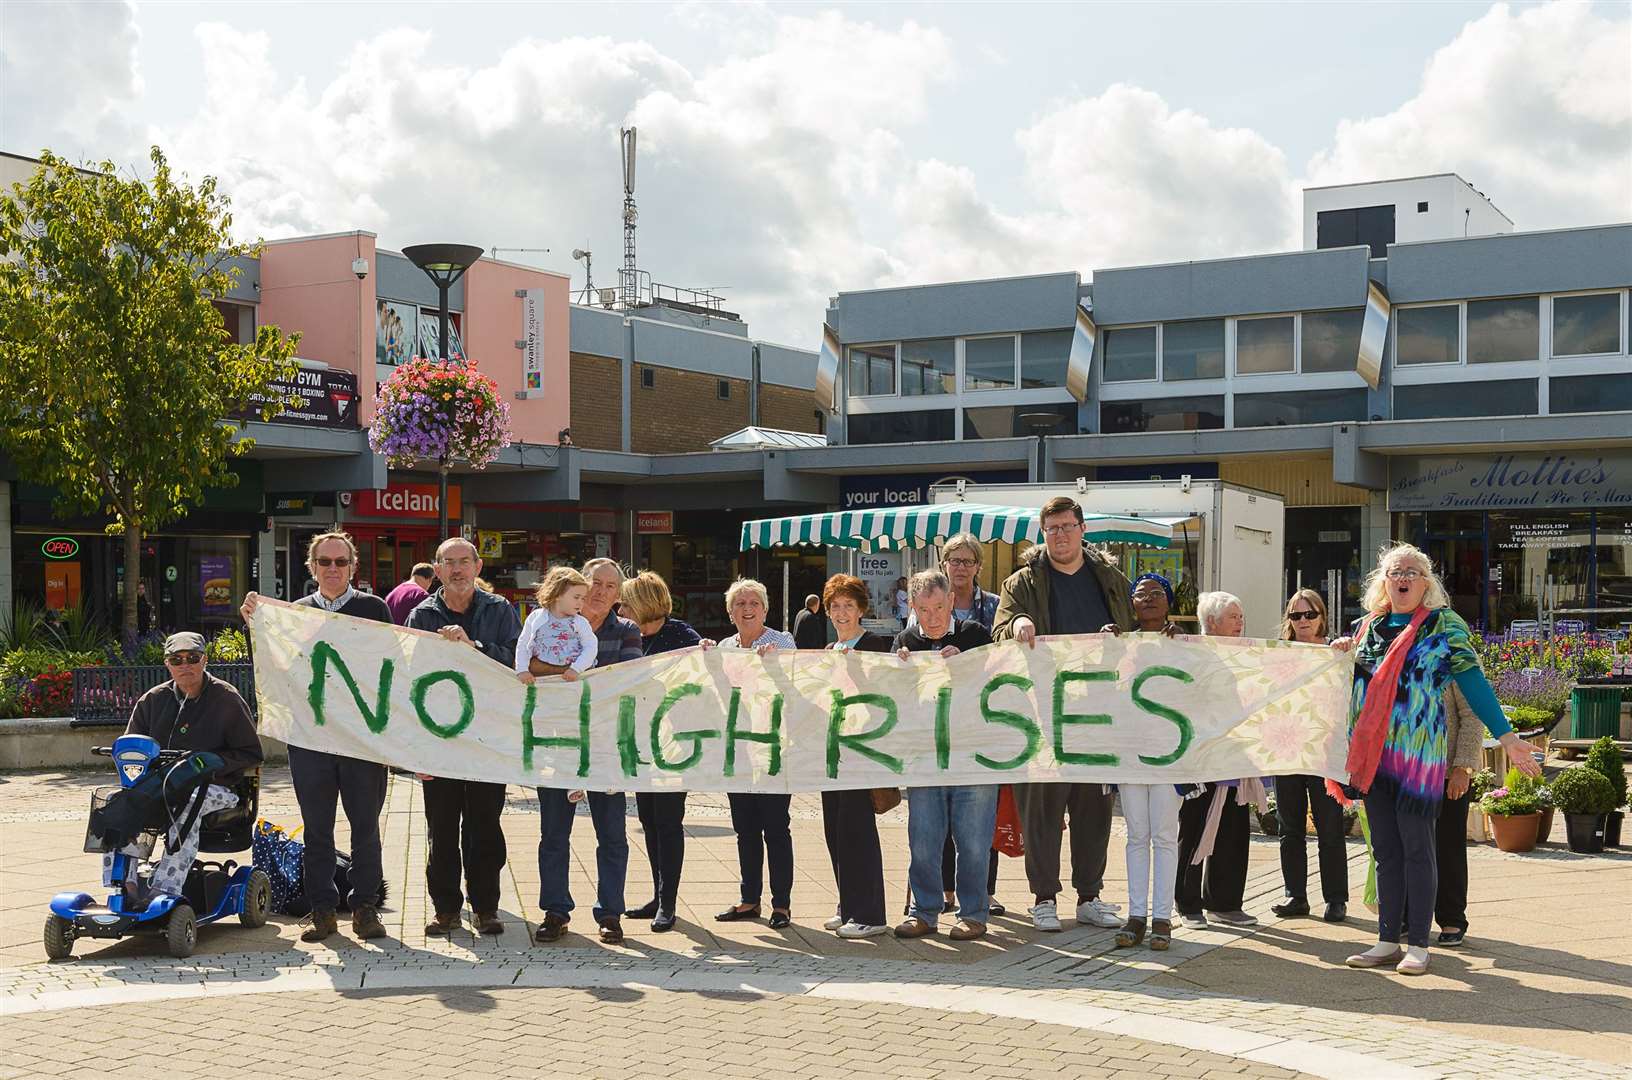 Protesters fought against the planned redevelopment of the town centre under U+I. Photo: Tony Jones